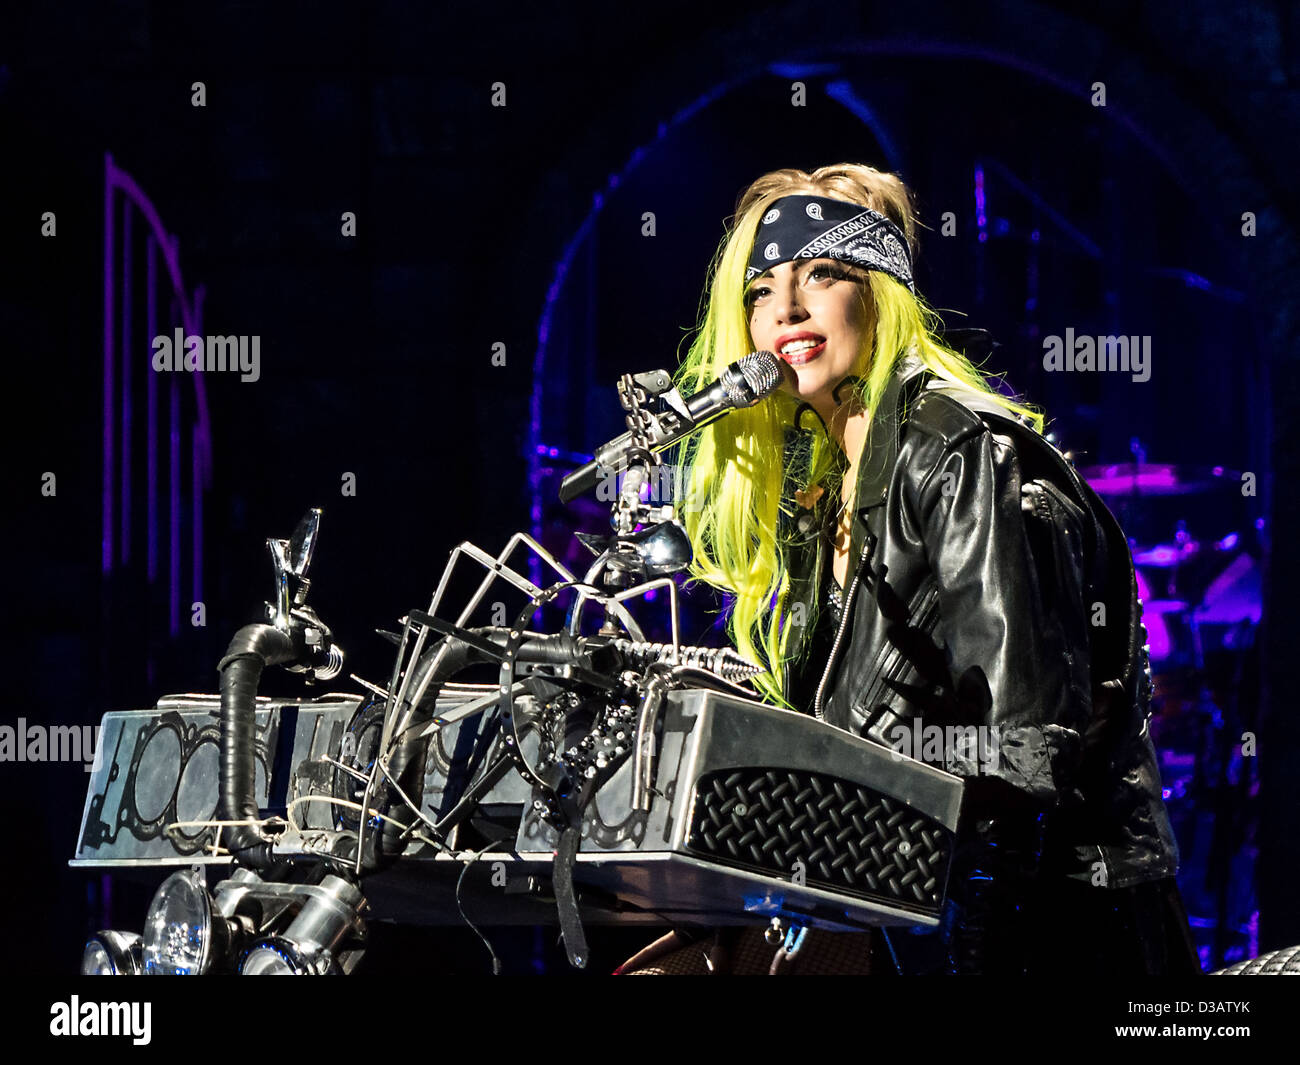 American singer Lady Gaga performs during her Born This Way Ball tour in Toronto, Ontario, Canada on Friday February 9, 2013. Stock Photo